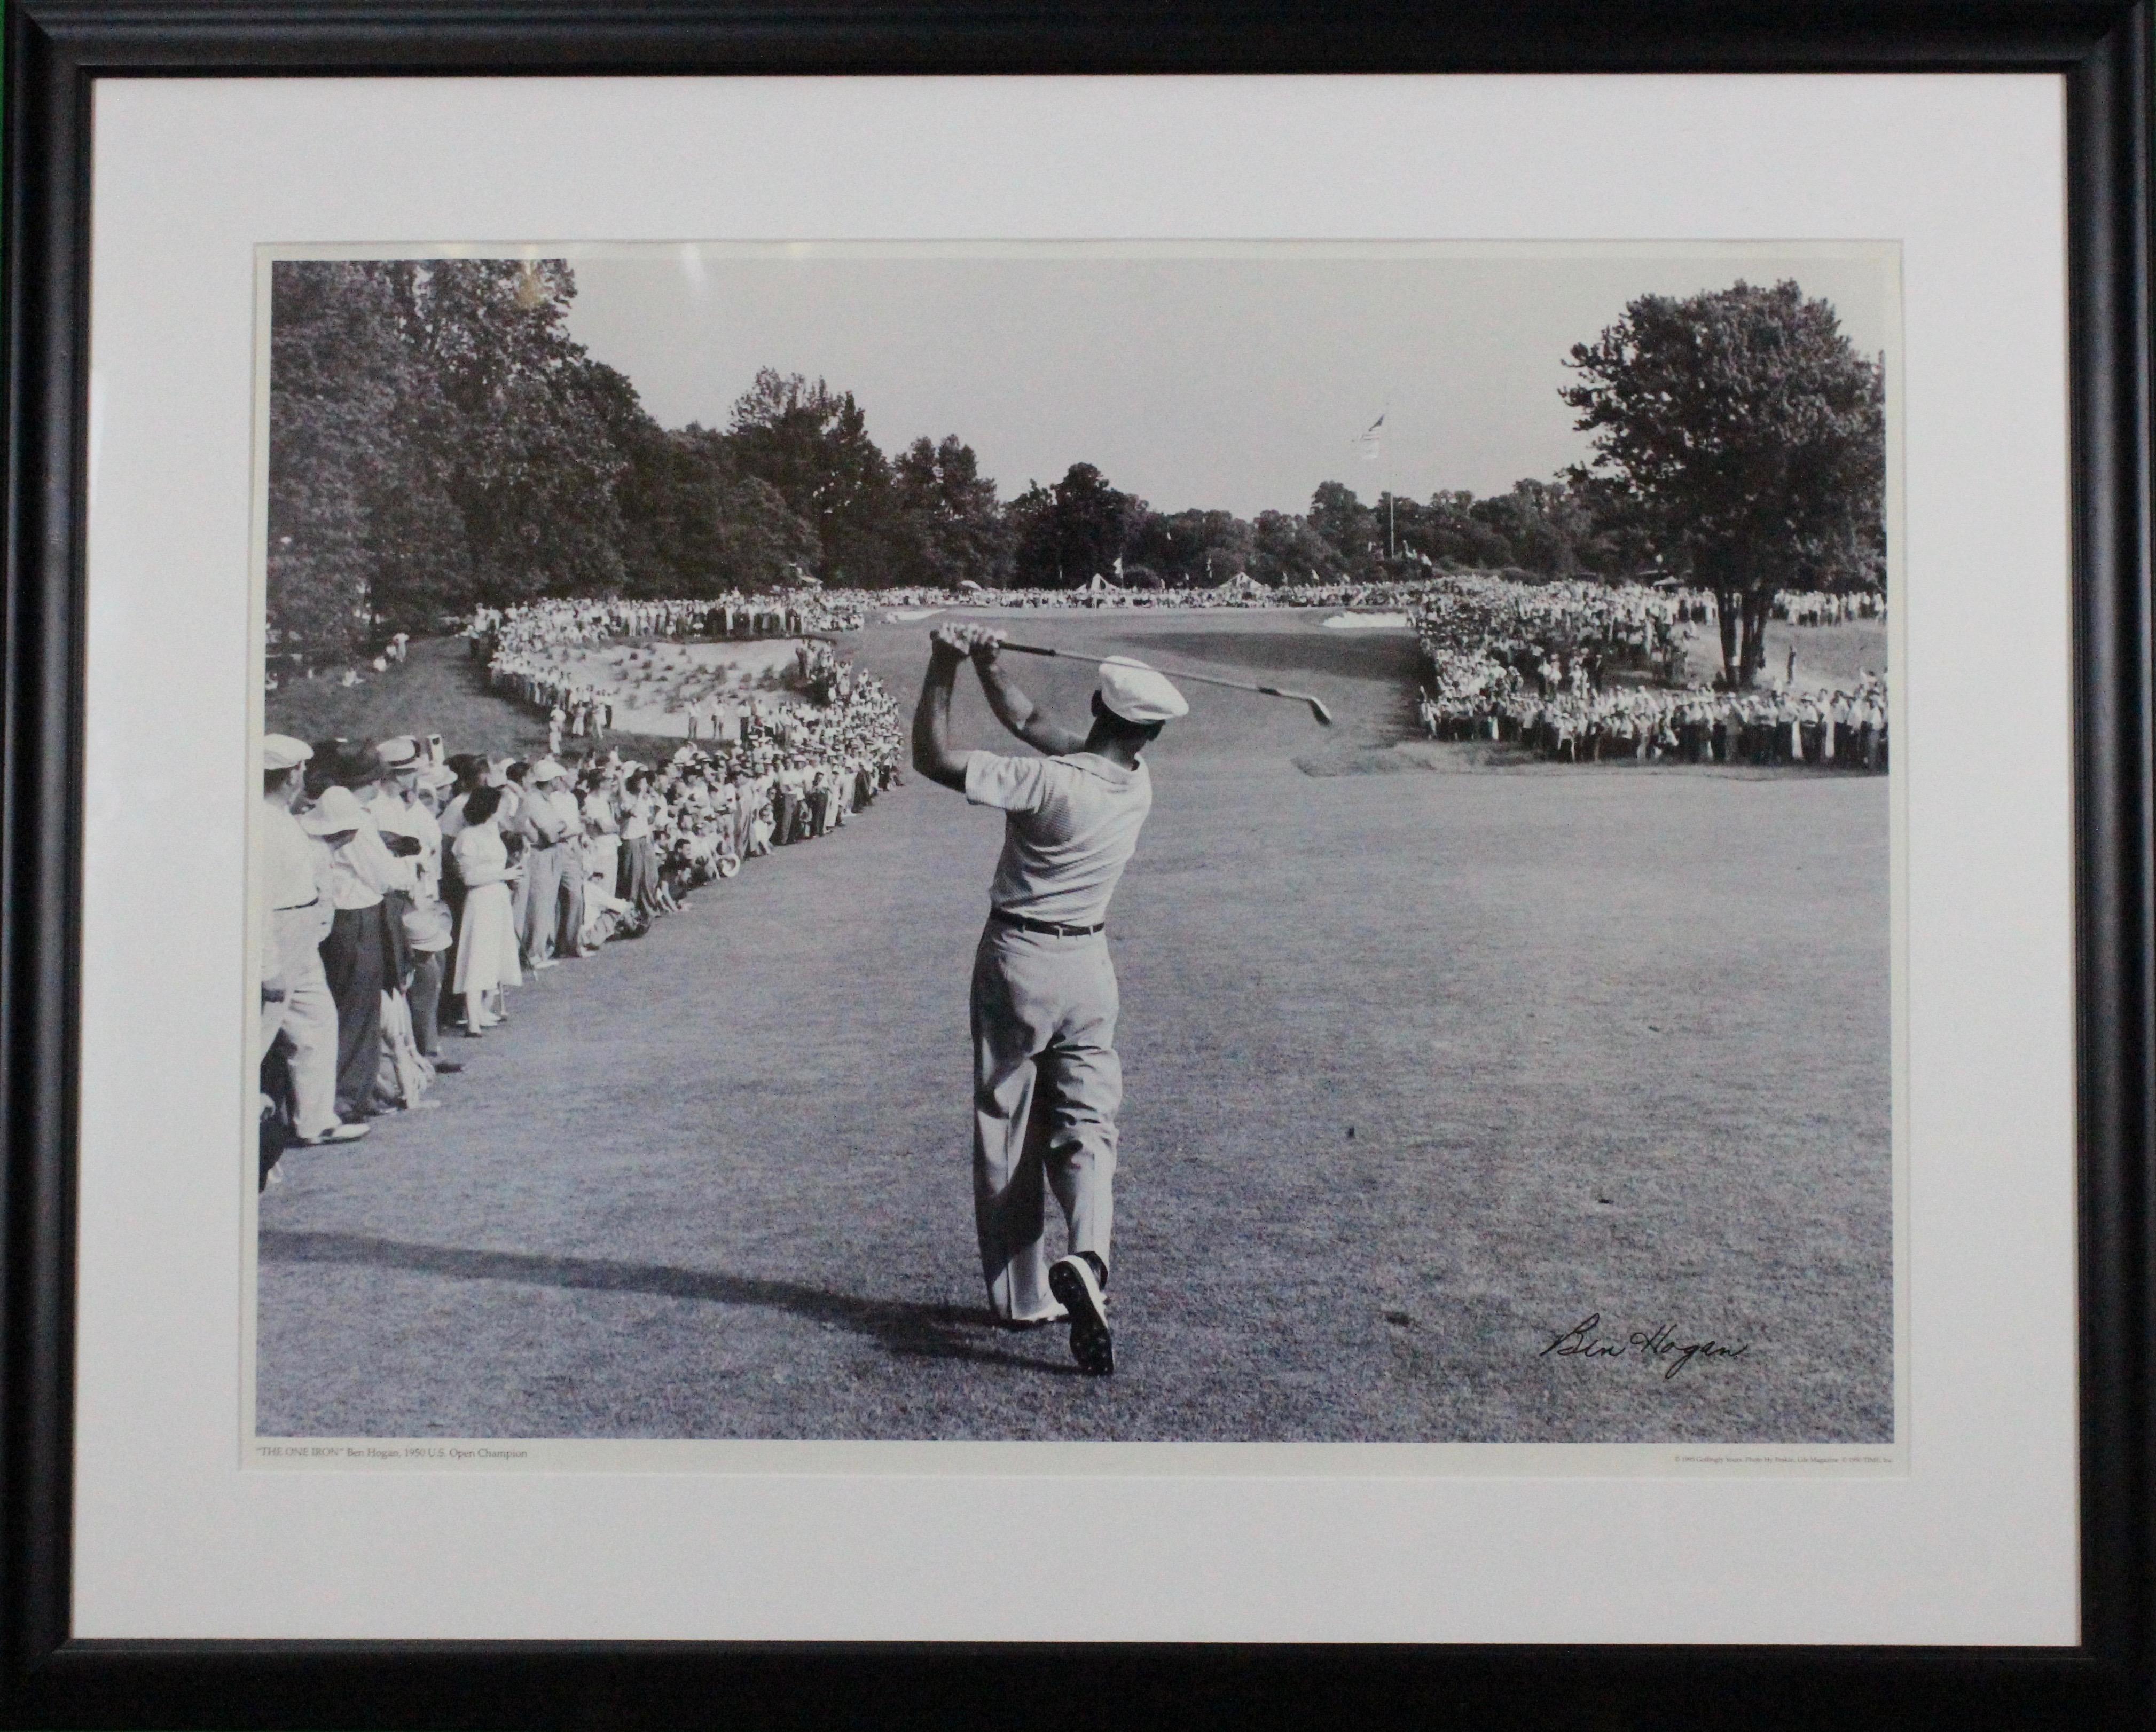 "The One Iron" Ben Hogan 1950 U.S. Open Champion 1995 B&W Framed Print - Photograph by Unknown